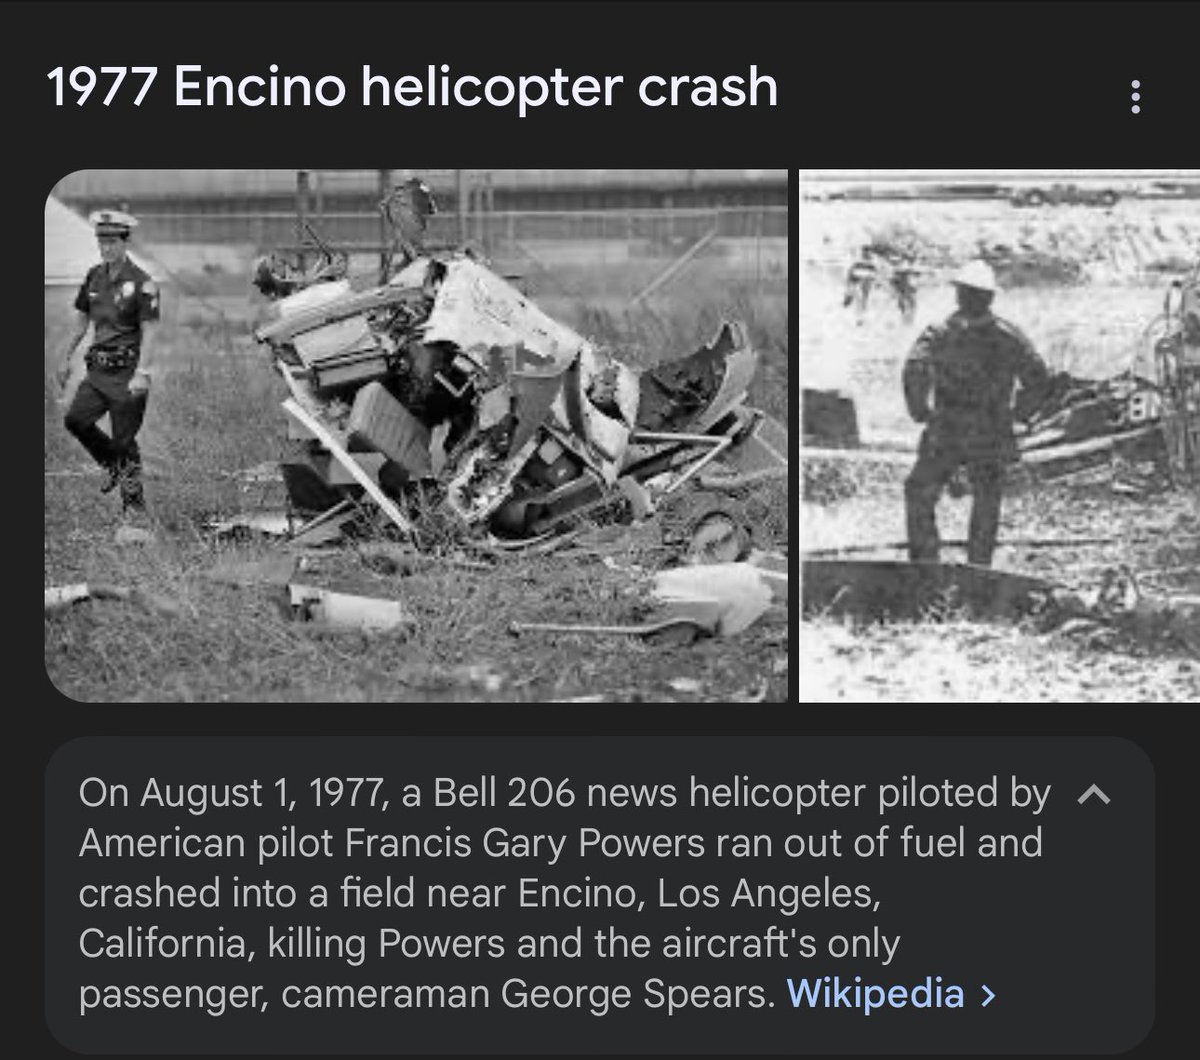 Sadly he would later lose his life flying a Bell 206 Jet Ranger news helicopter in LA along with his cameraman.